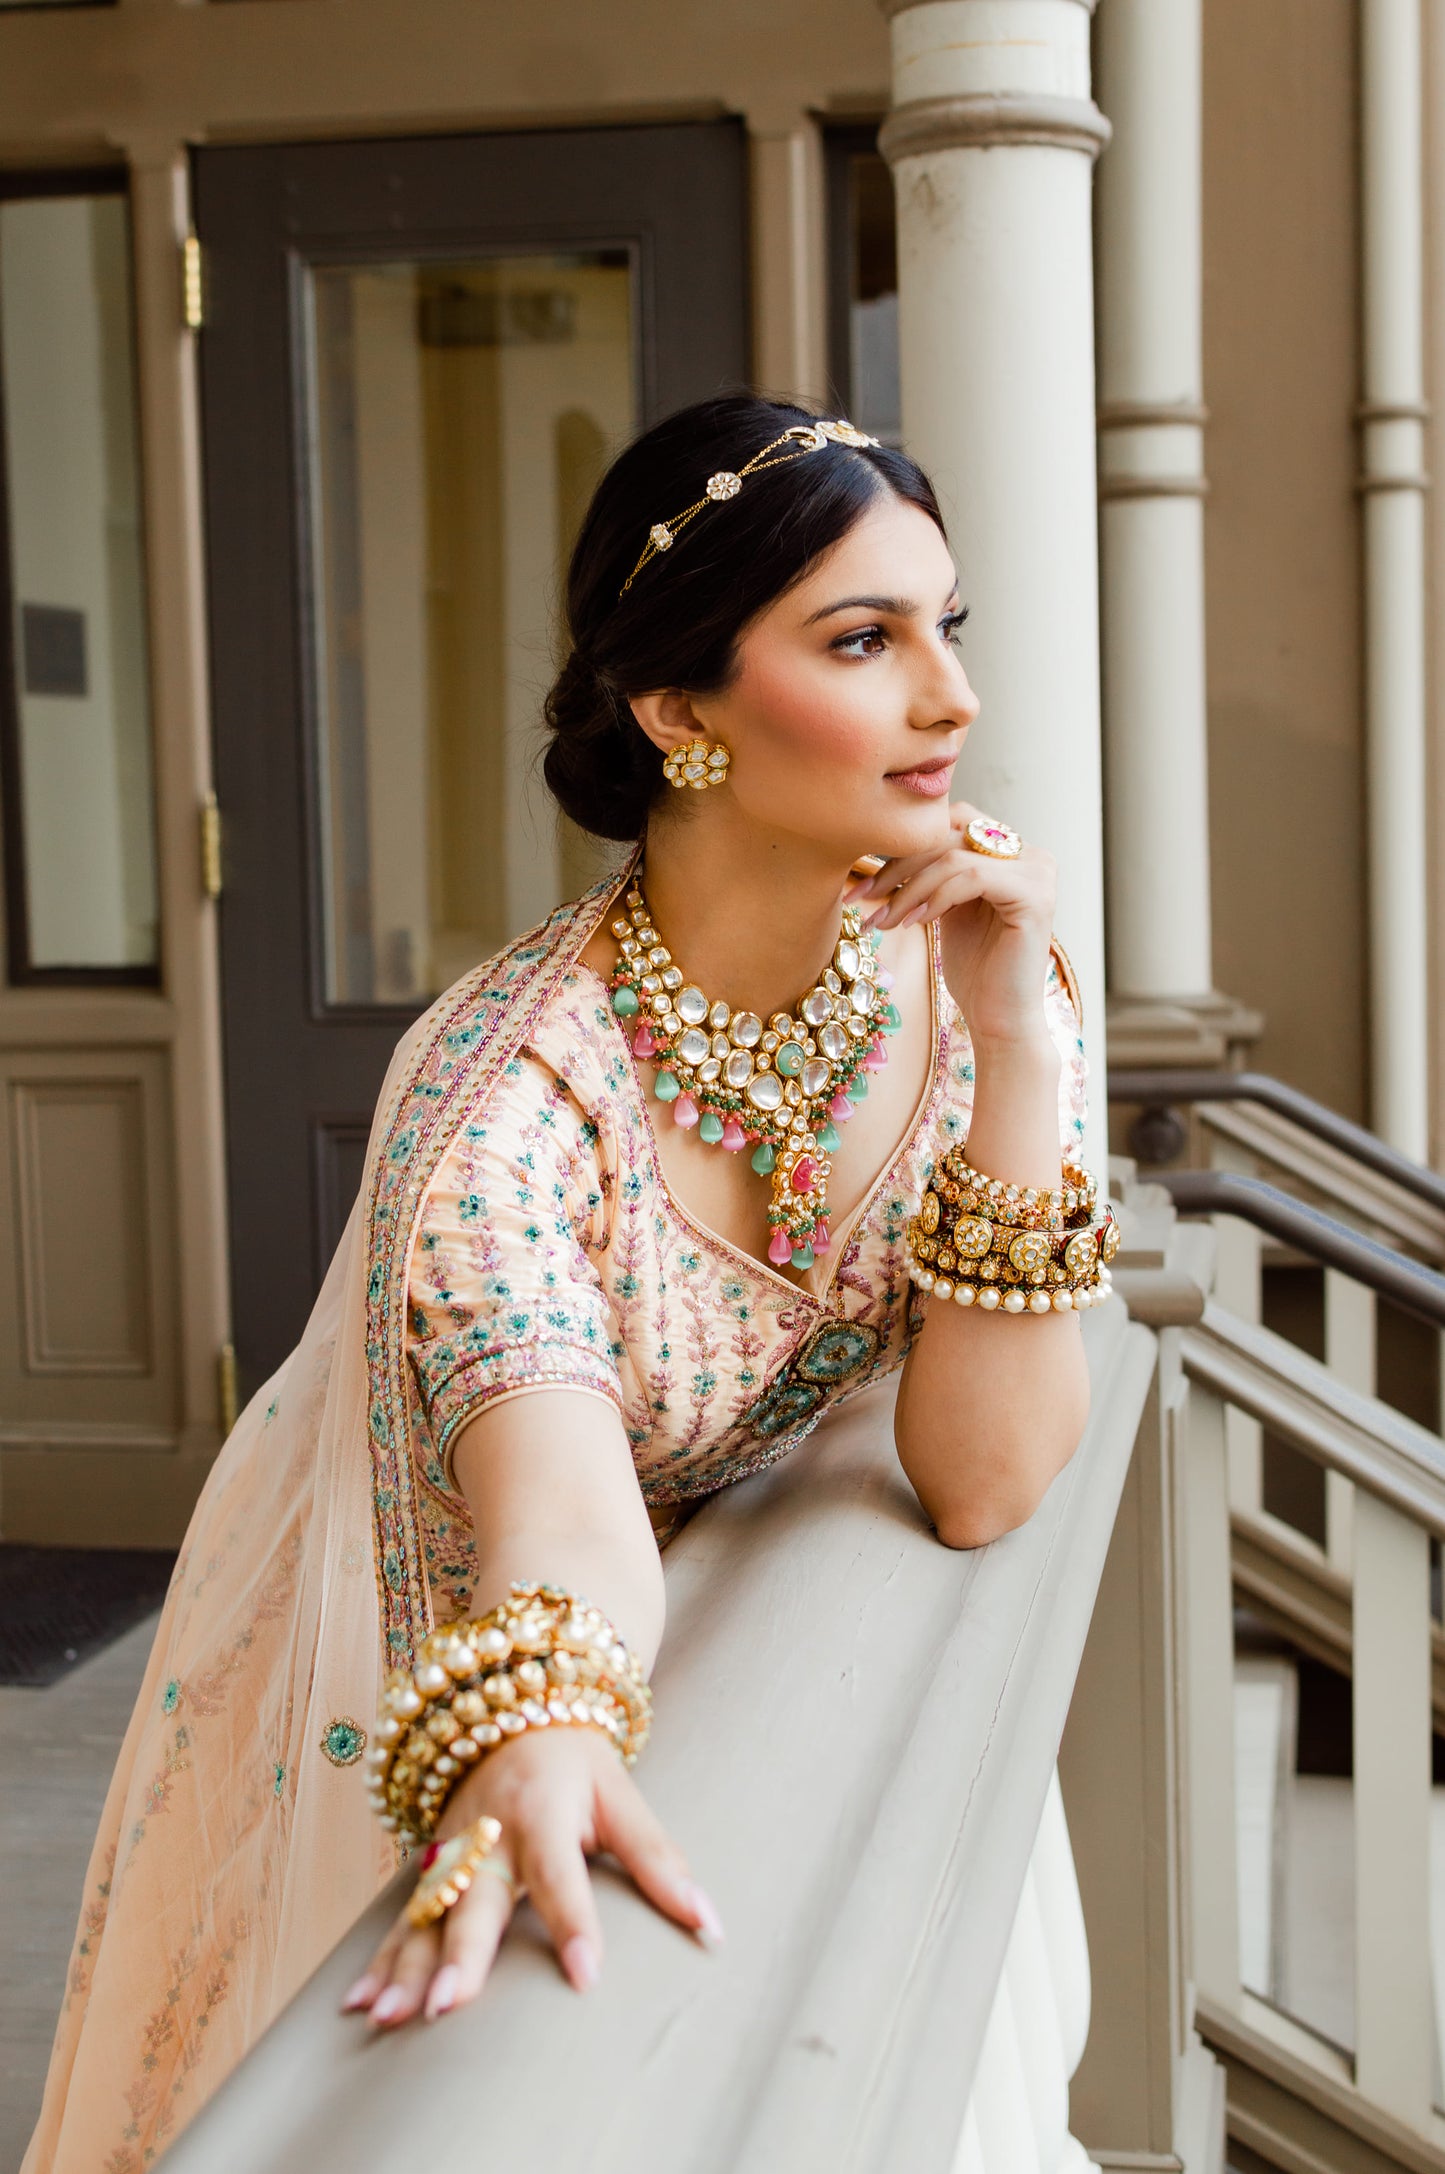 Bridal Indian jewelry for brides & women in USA